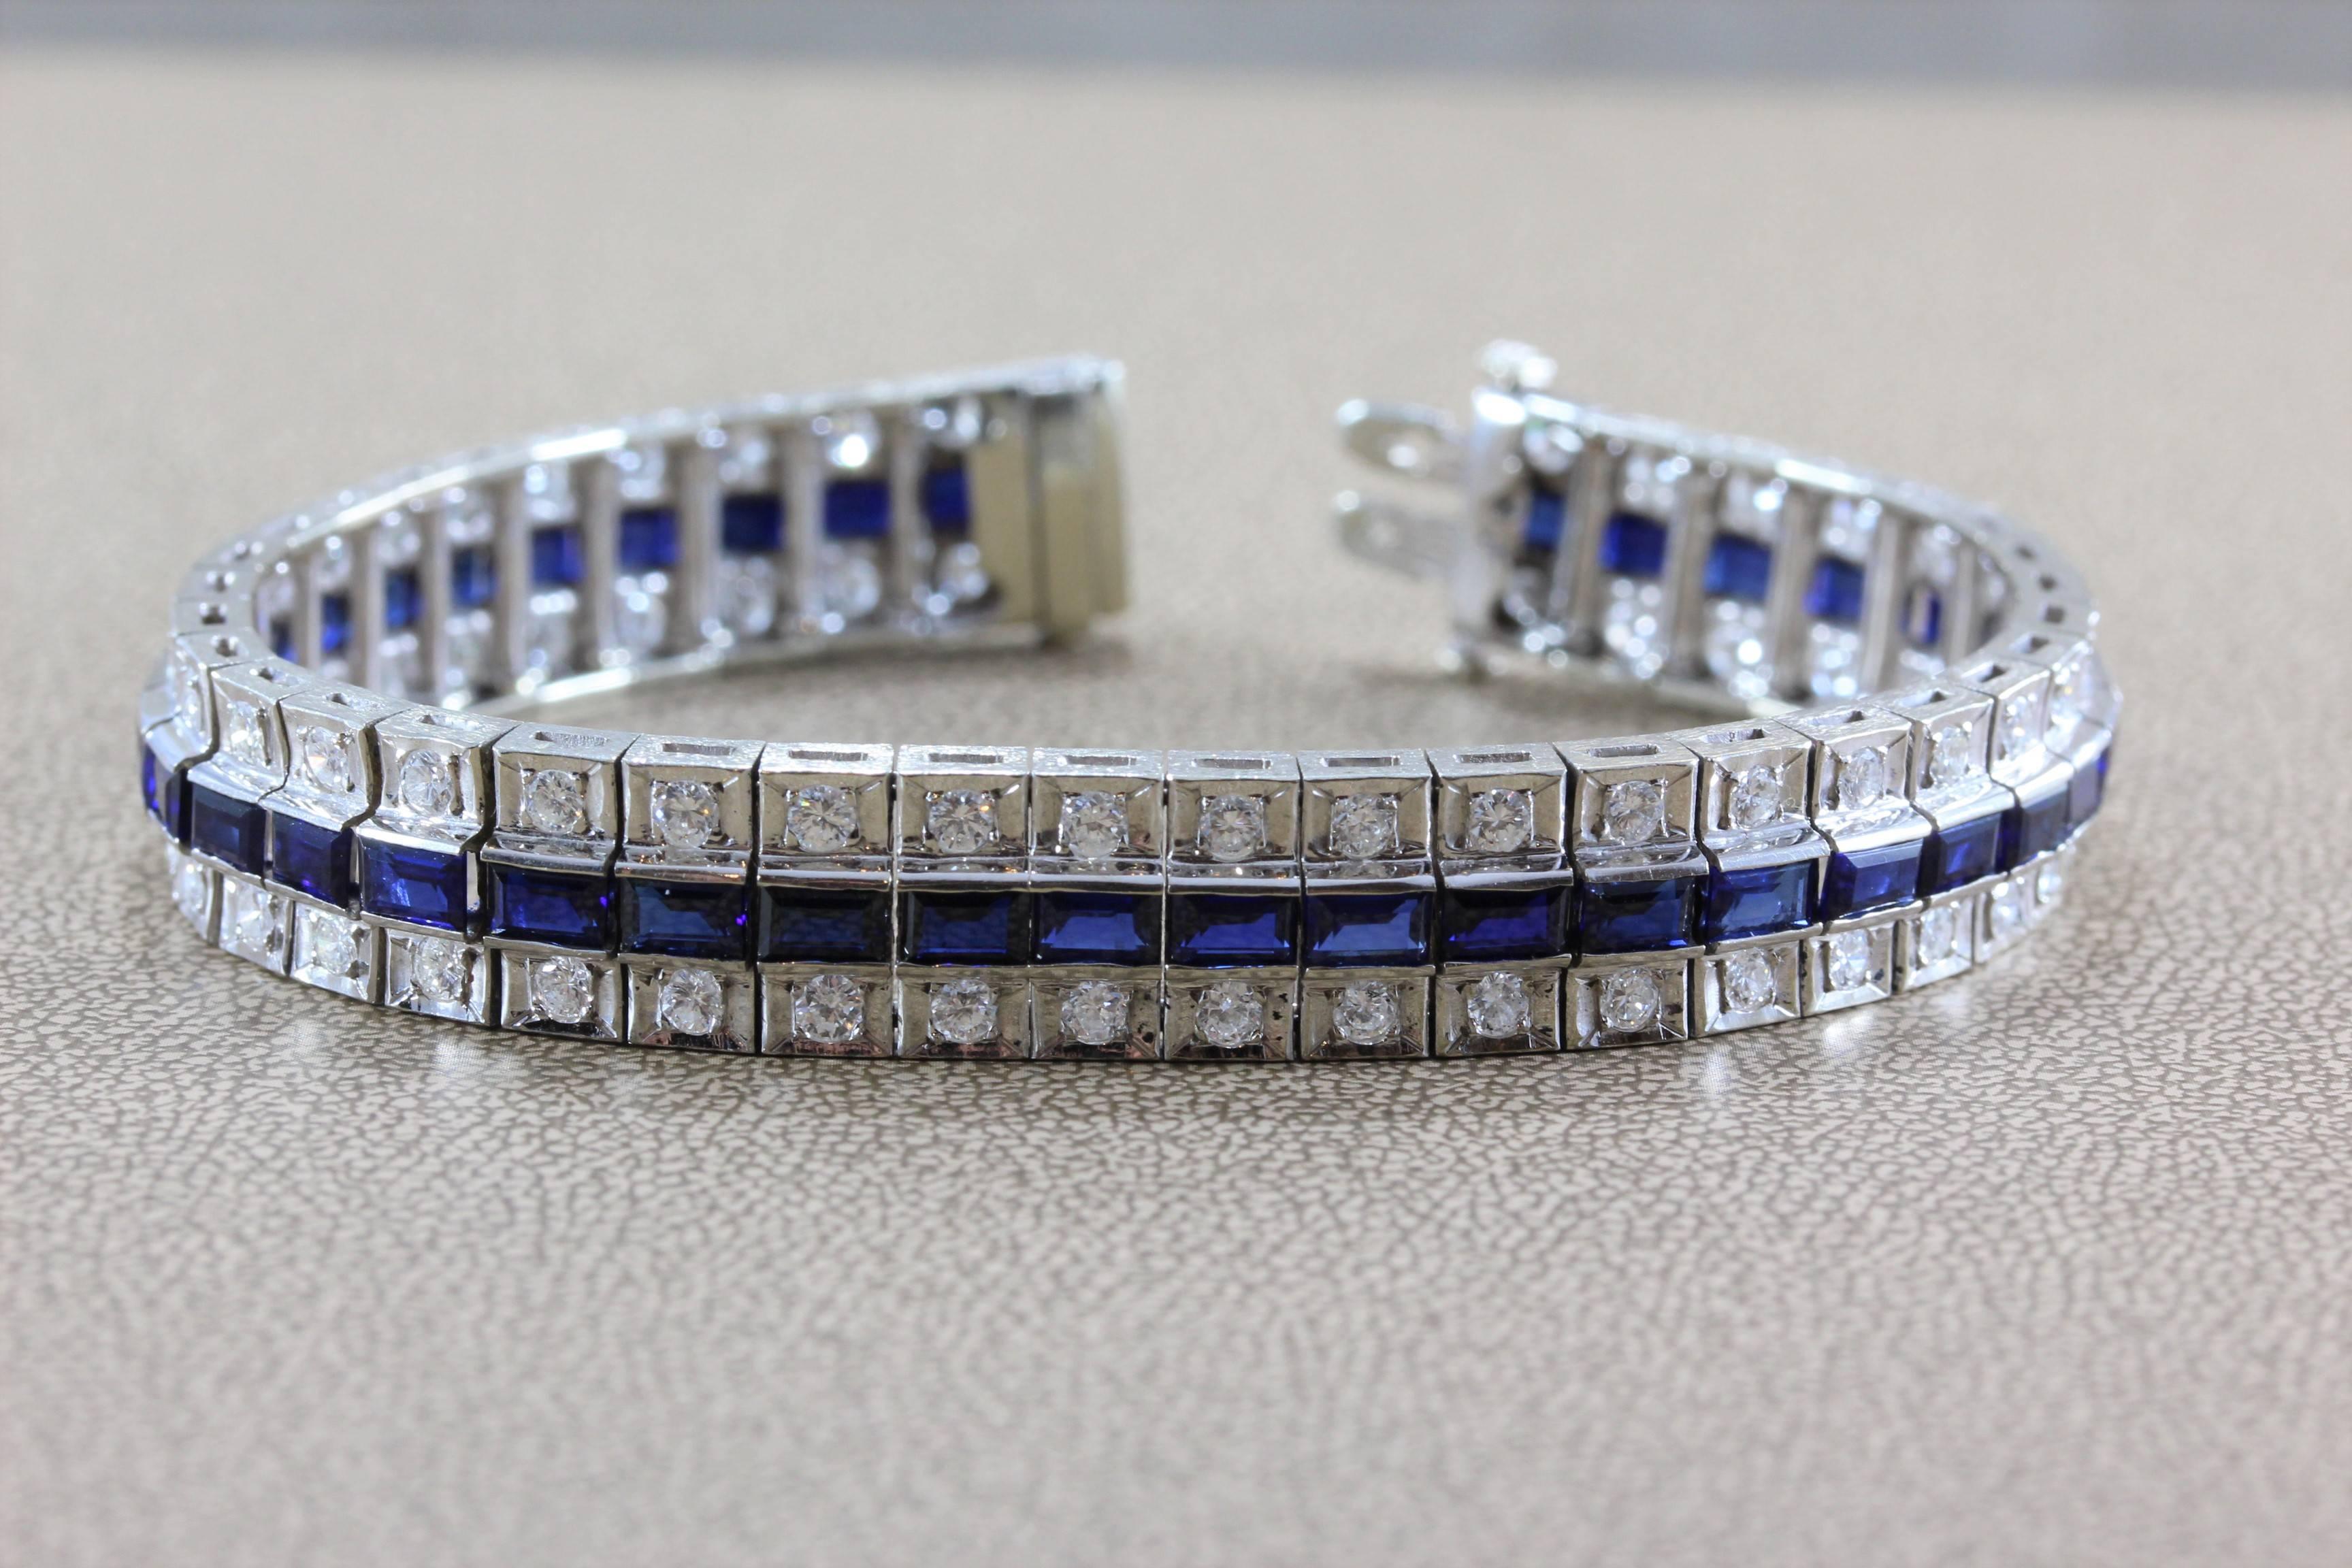 An elegant bracelet featuring 4 carats of diamonds and 4 carats of vivid blue sapphire which are set in 18K white gold. A simple stylish bracelet that can be worn for all occasions. 

Dimensions: 7.25 x 0.4 inches
